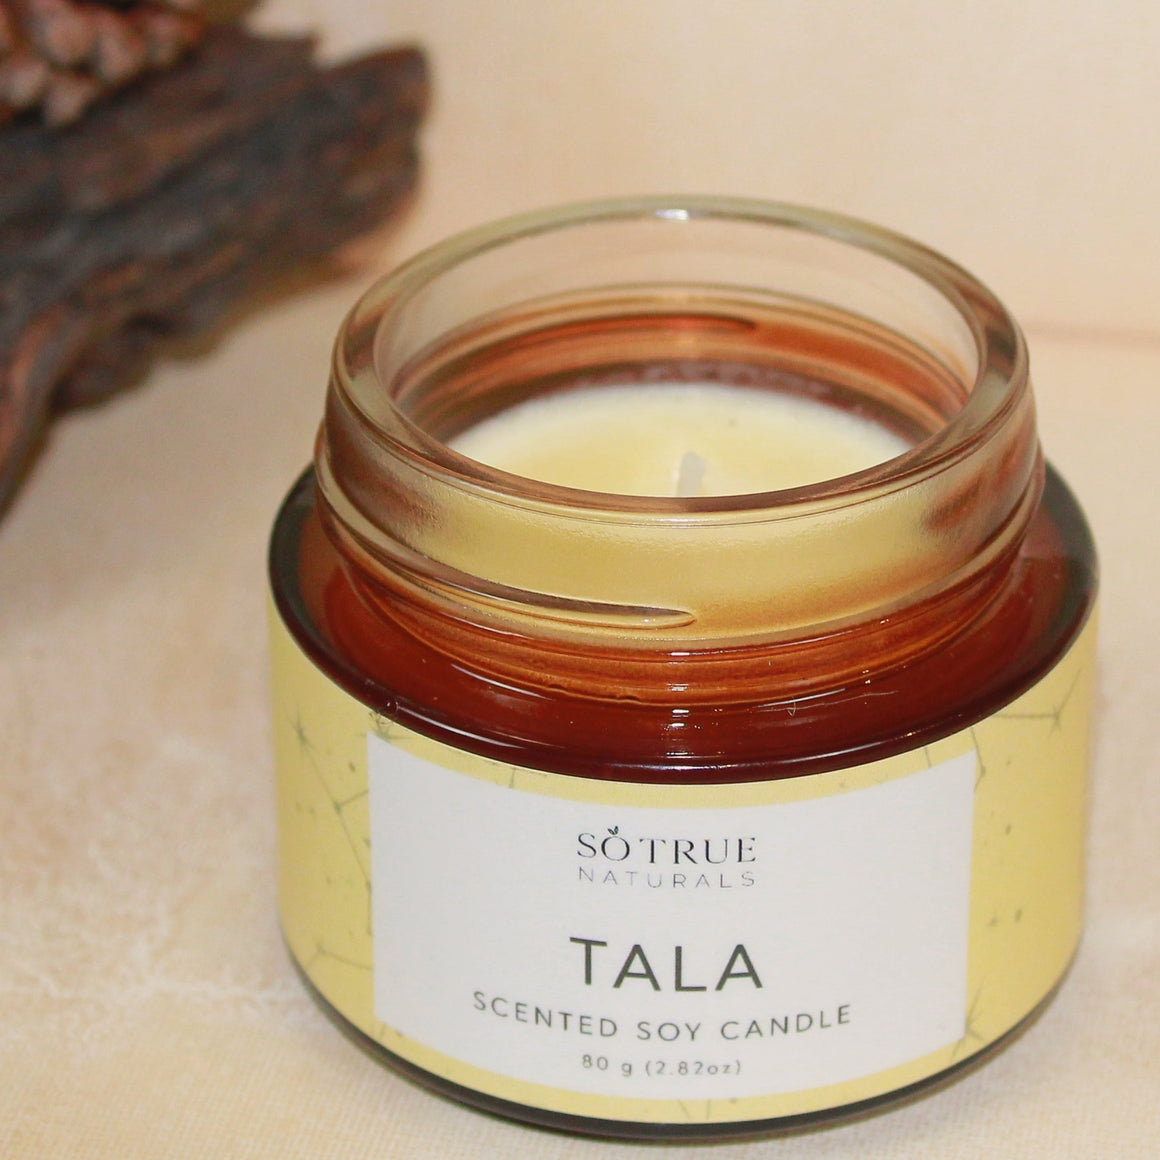 Scented Soy Candle - Tala